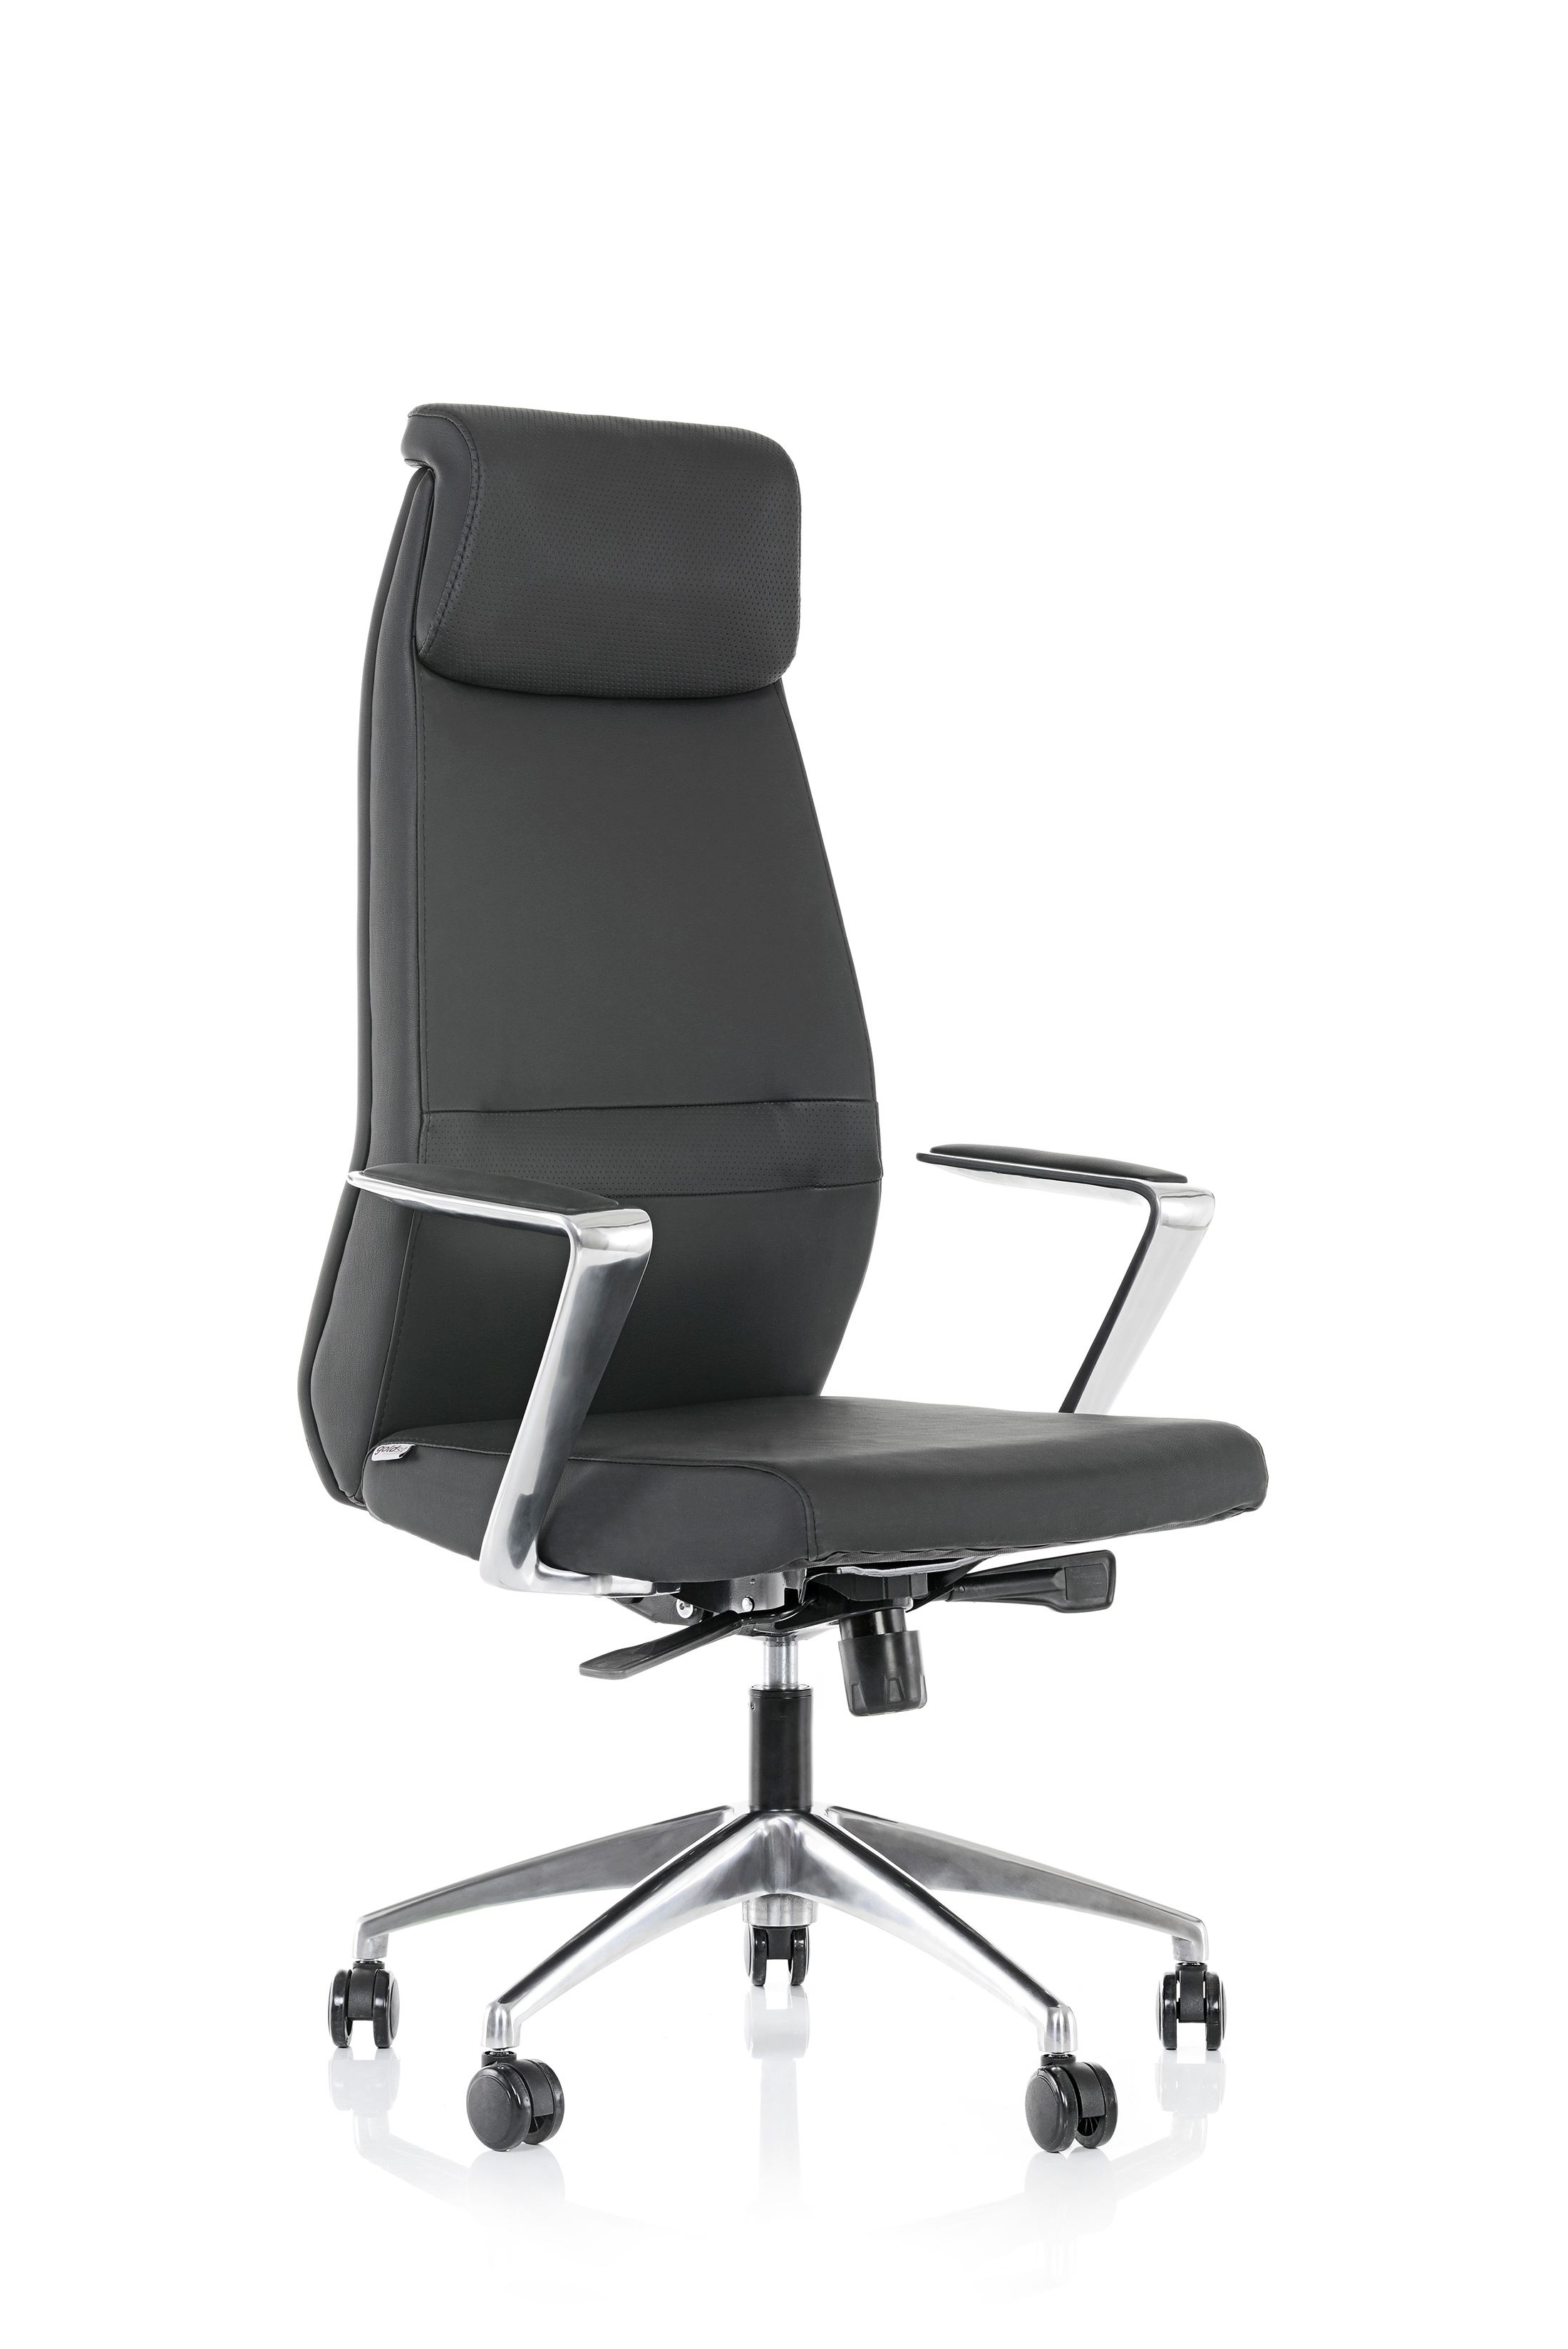 FELIX 000C MANAGER CHAIR